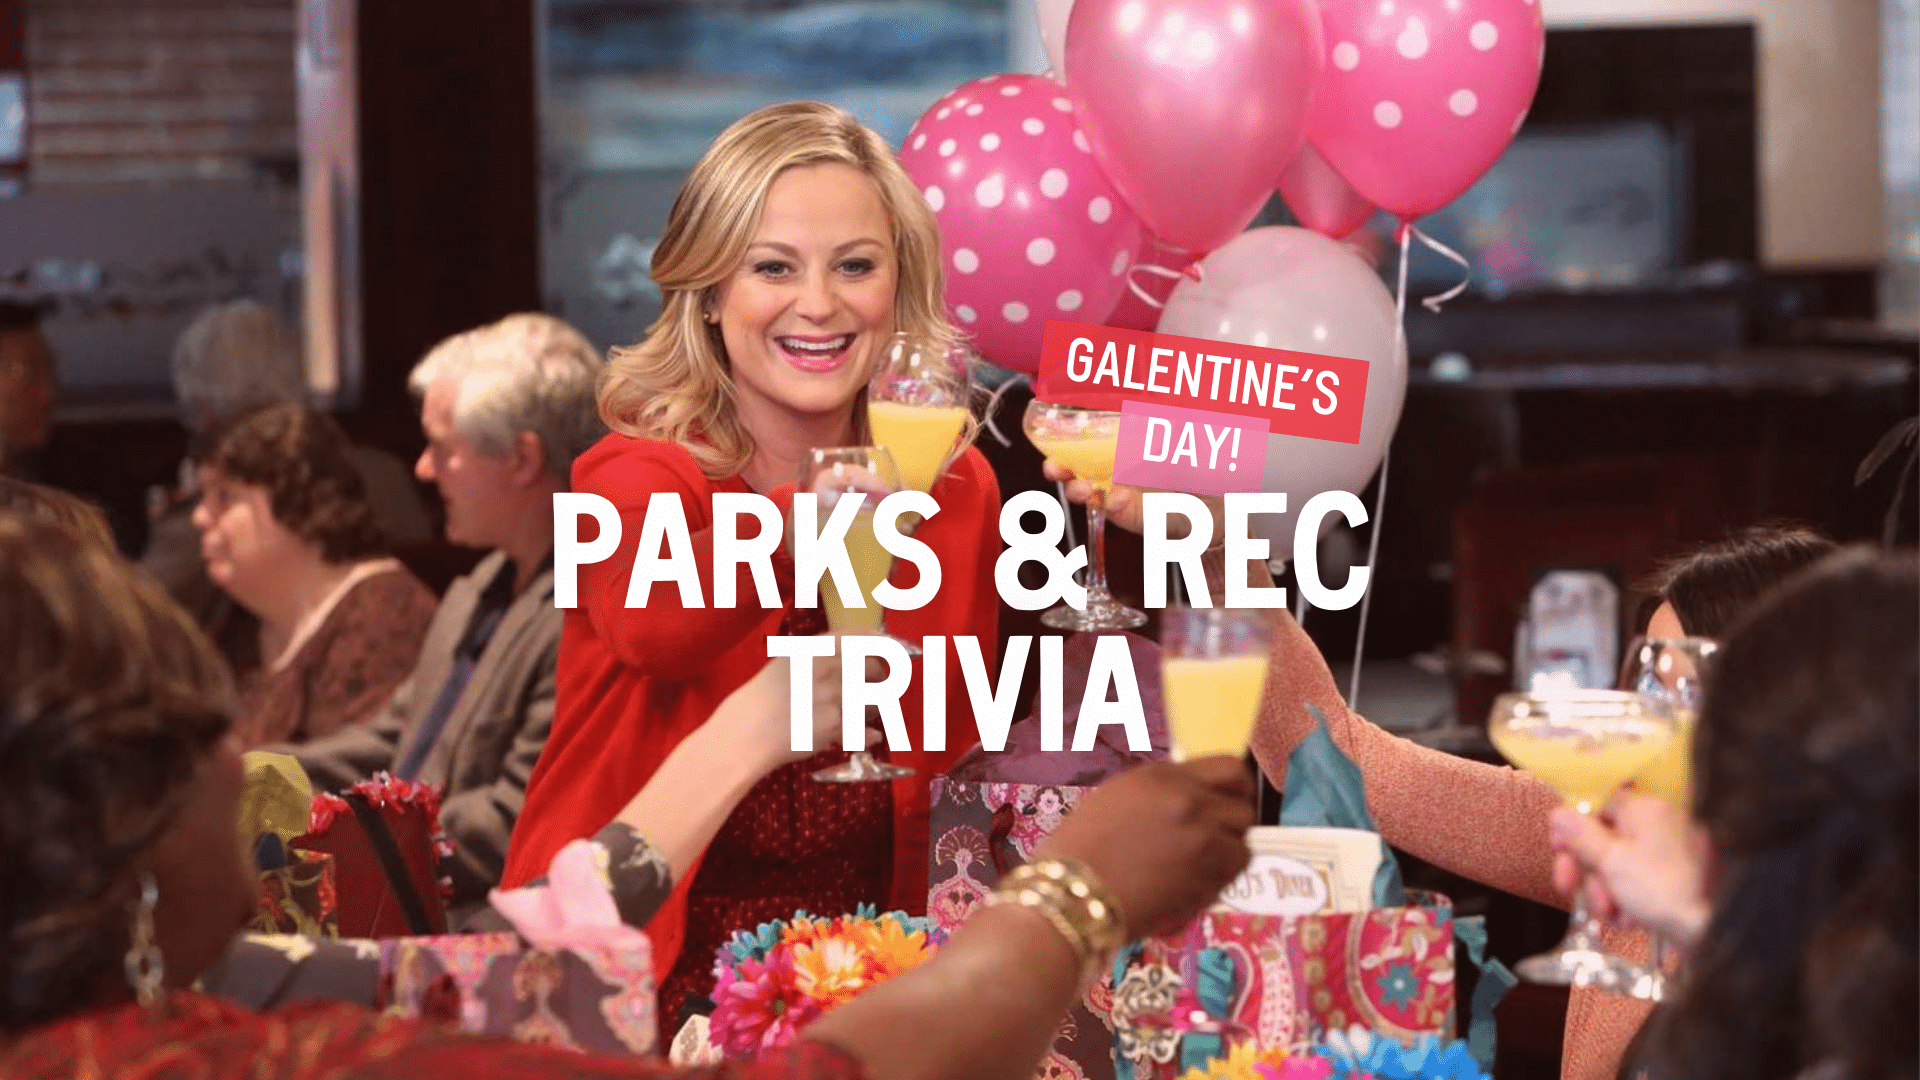 Leslie Knope cheersing friends, pink balloons. Text reading "Parks & Rec Trivia"